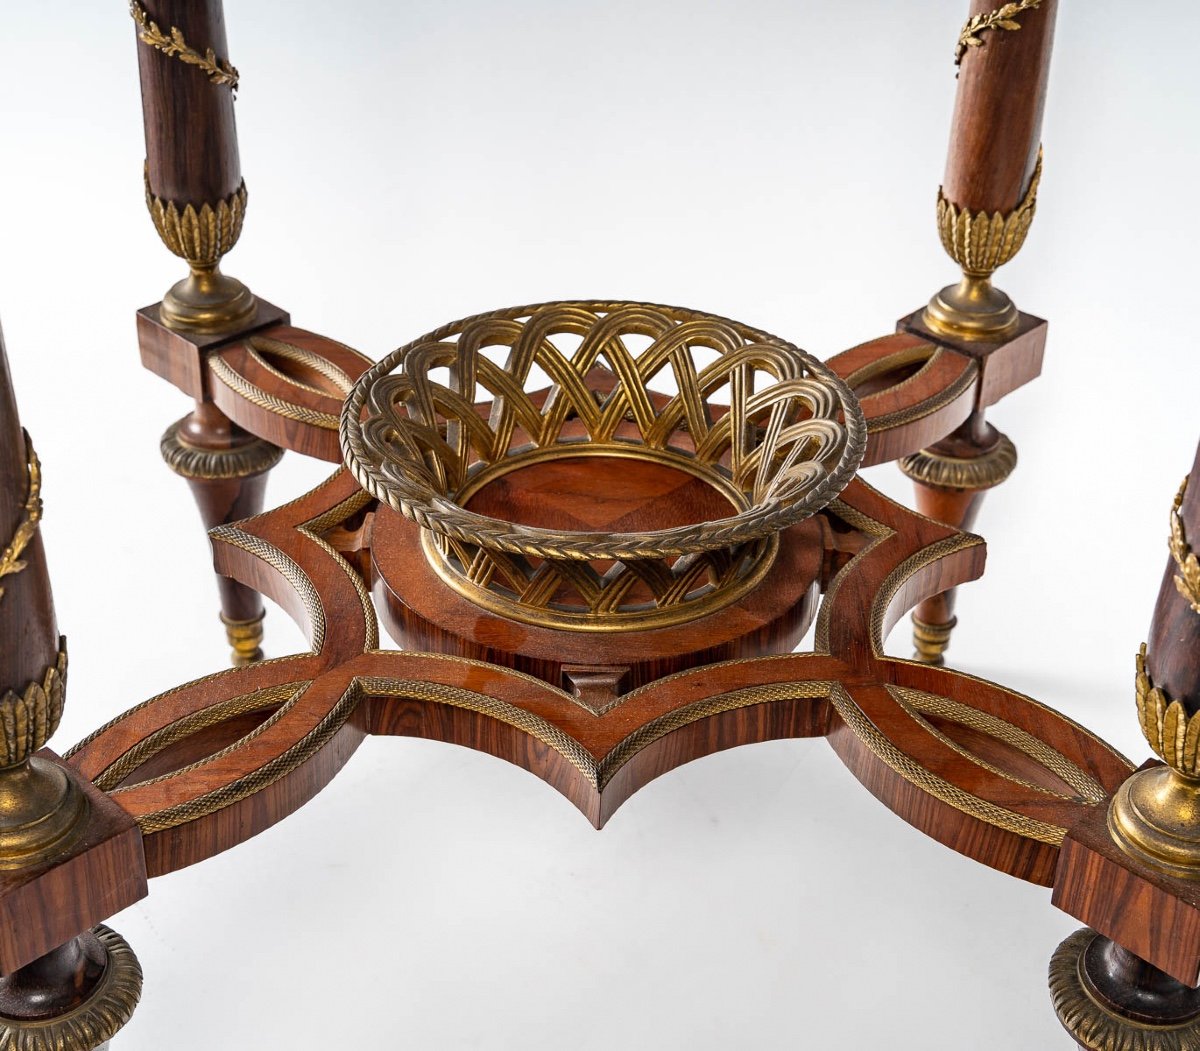 Pedestal Table Attributed To Weisweiler Early XIXth Century-photo-2